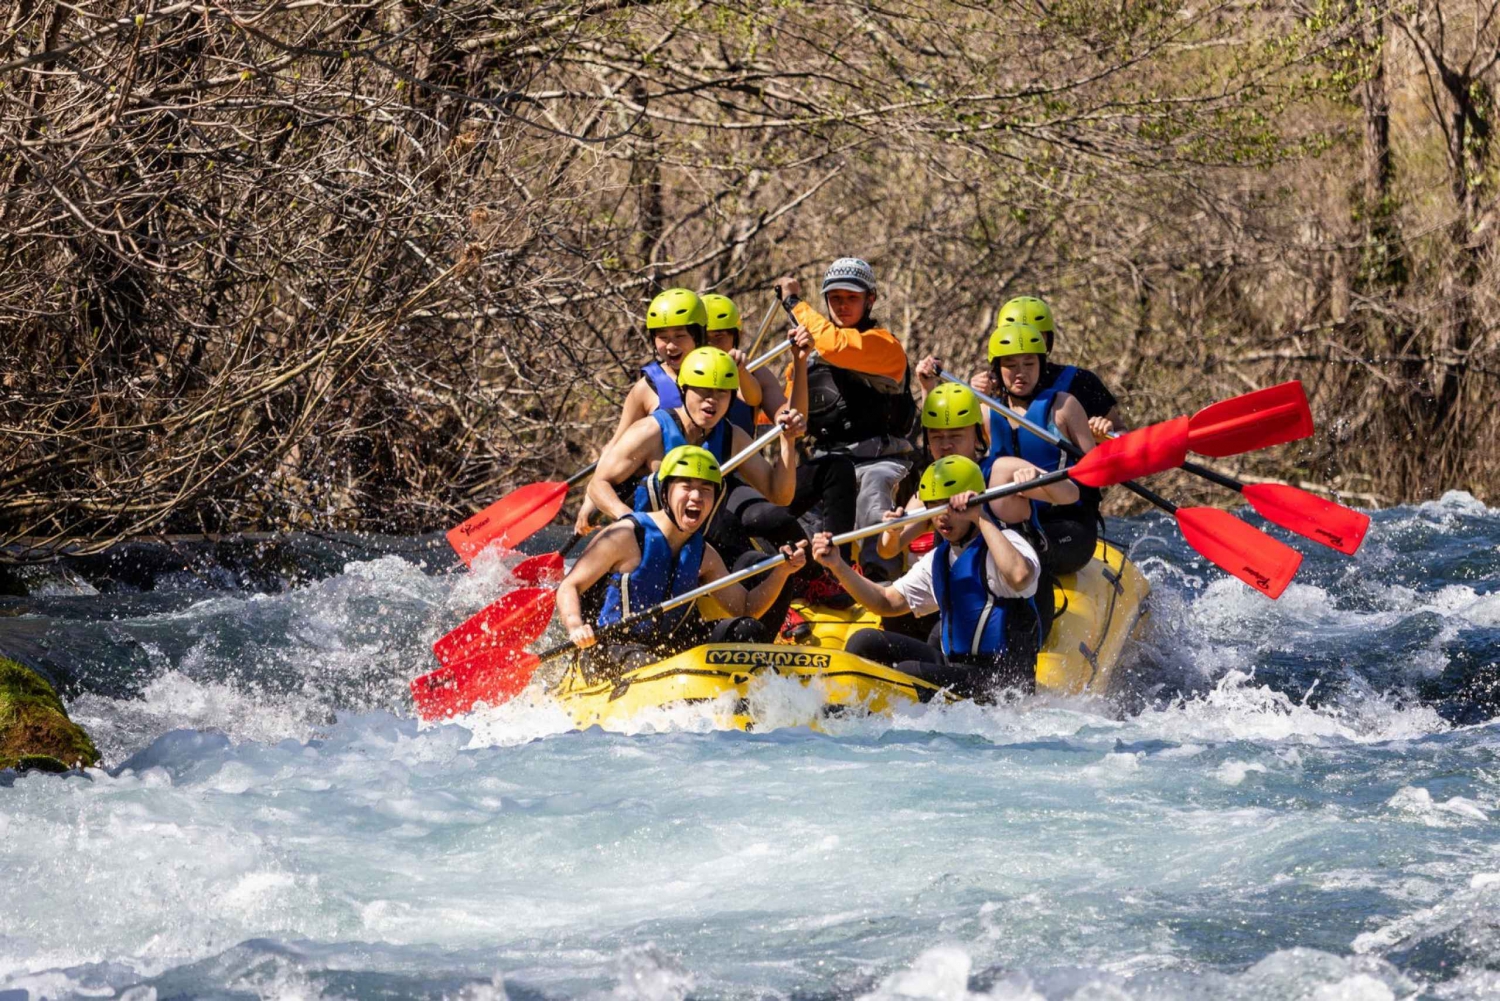 From Zadar: Cetina River Rafting Tour